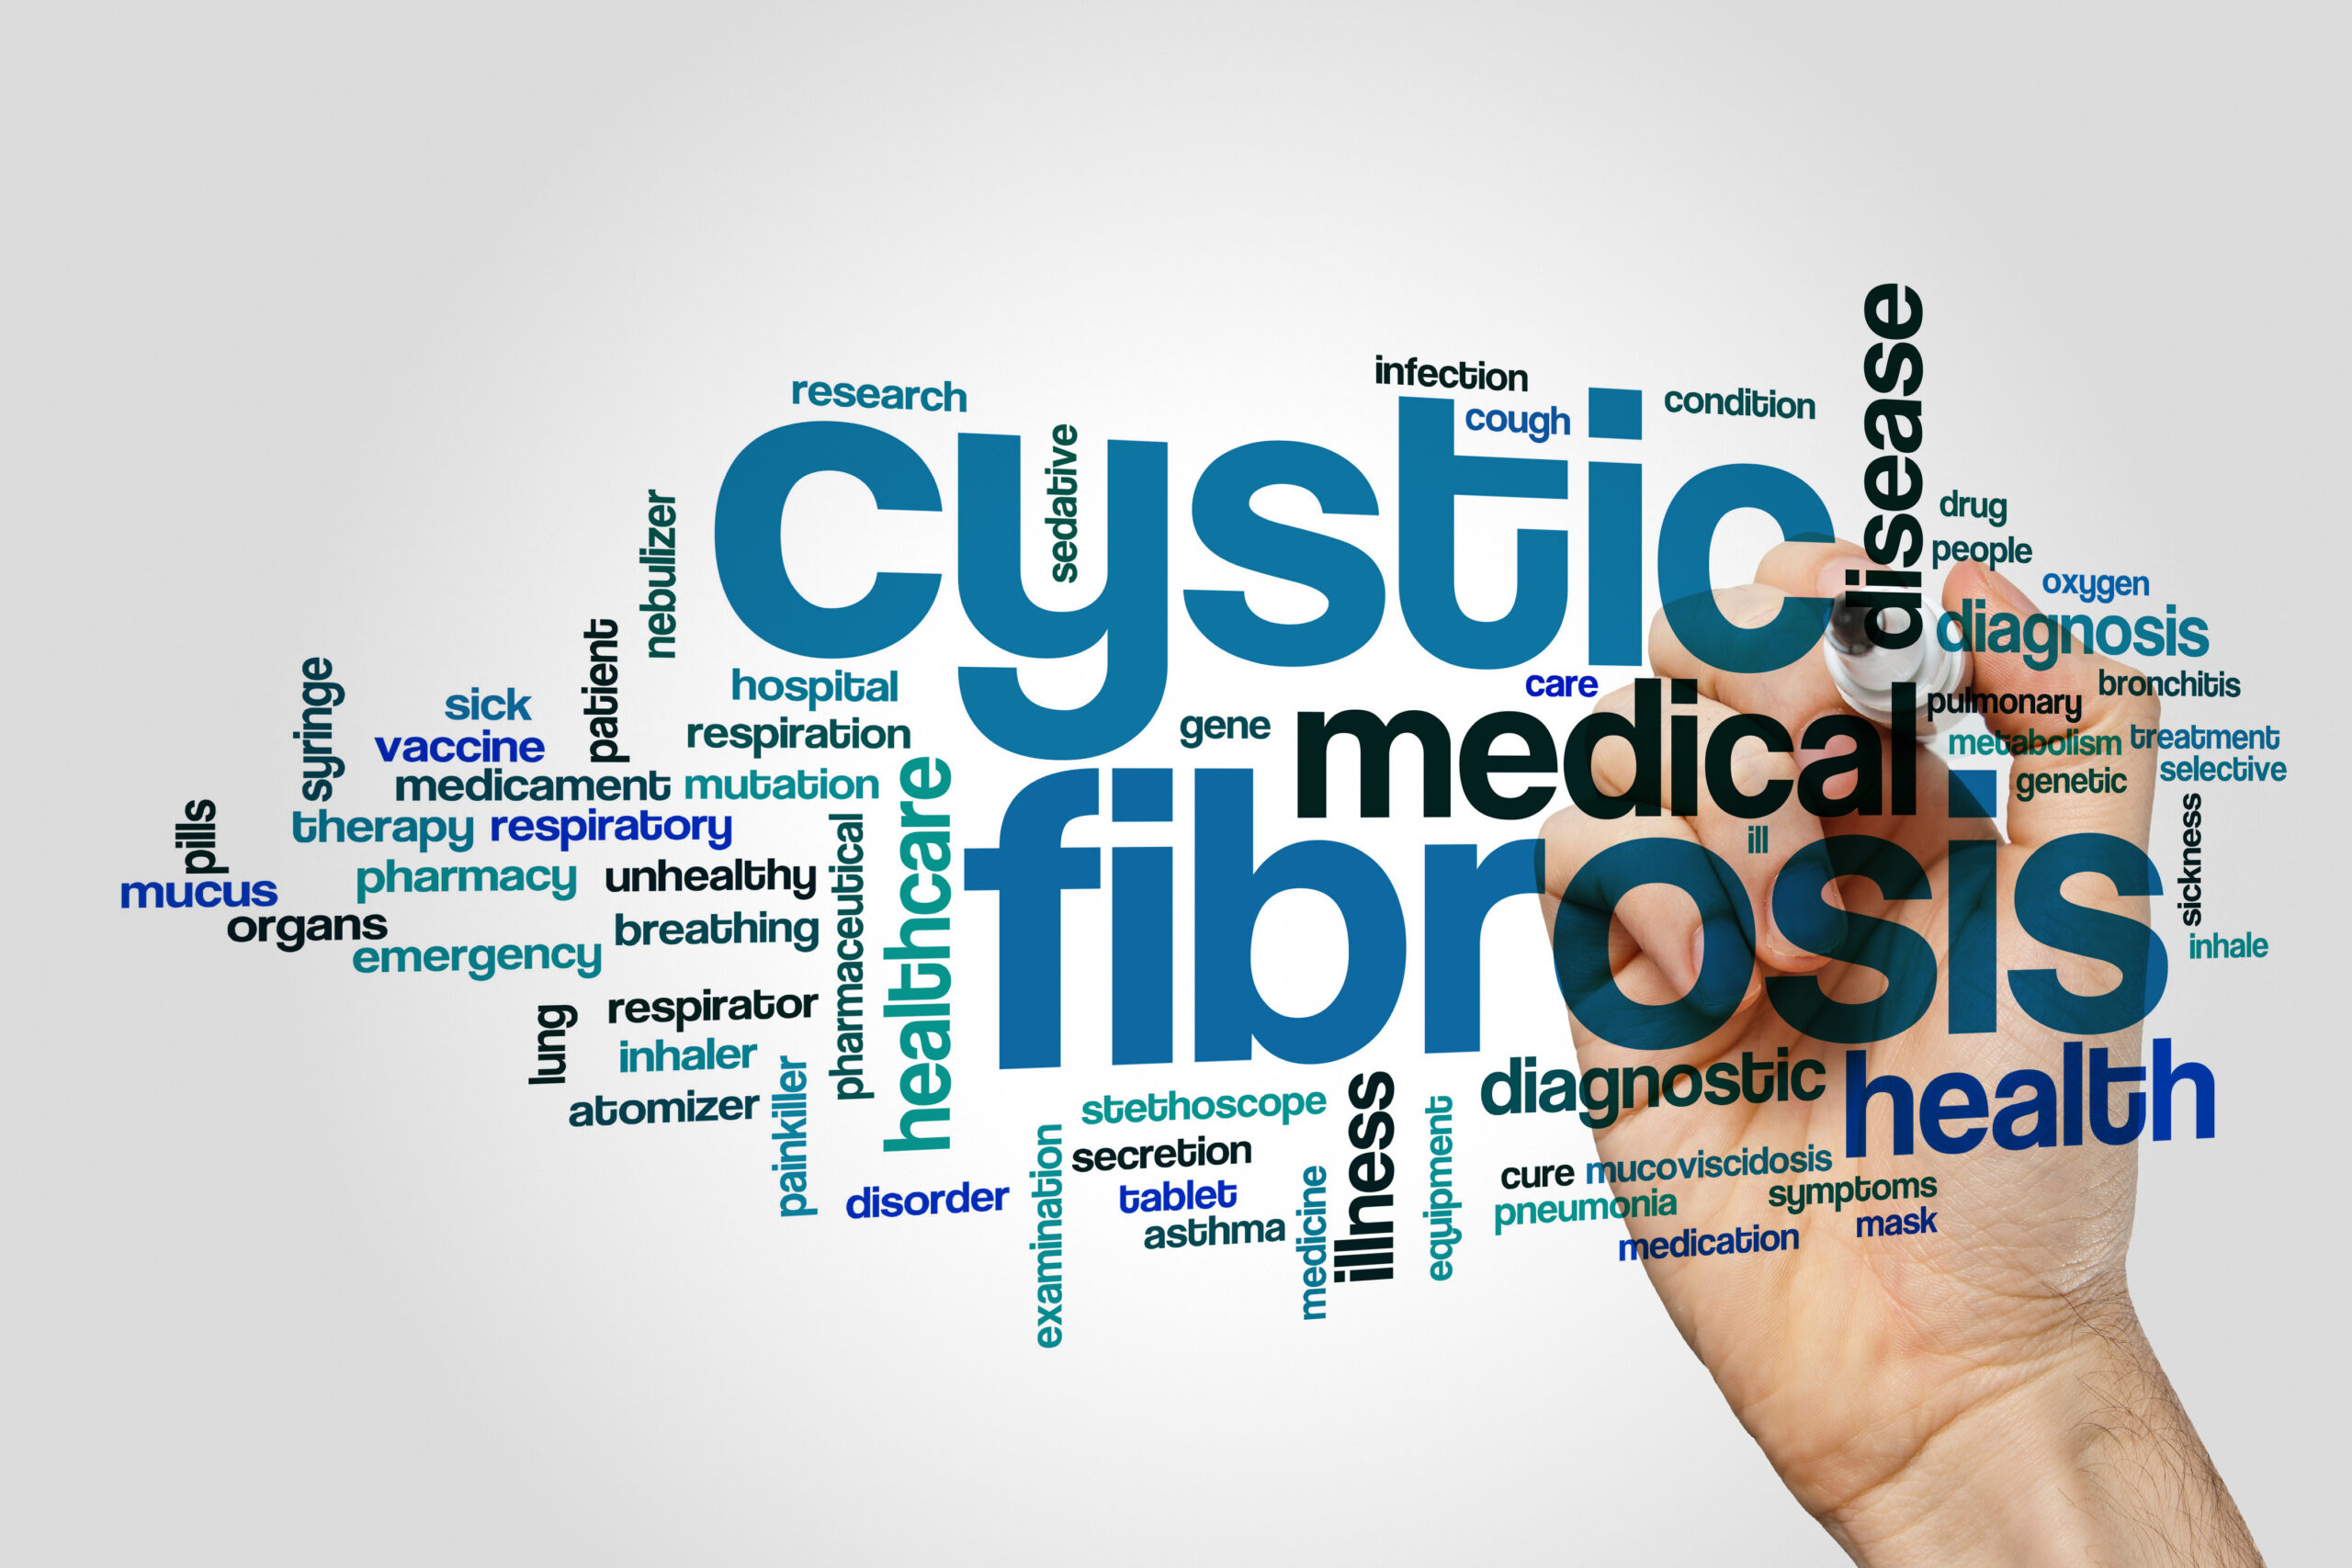 Possiblity Of New Treatments For Cystic Fibrosis-1